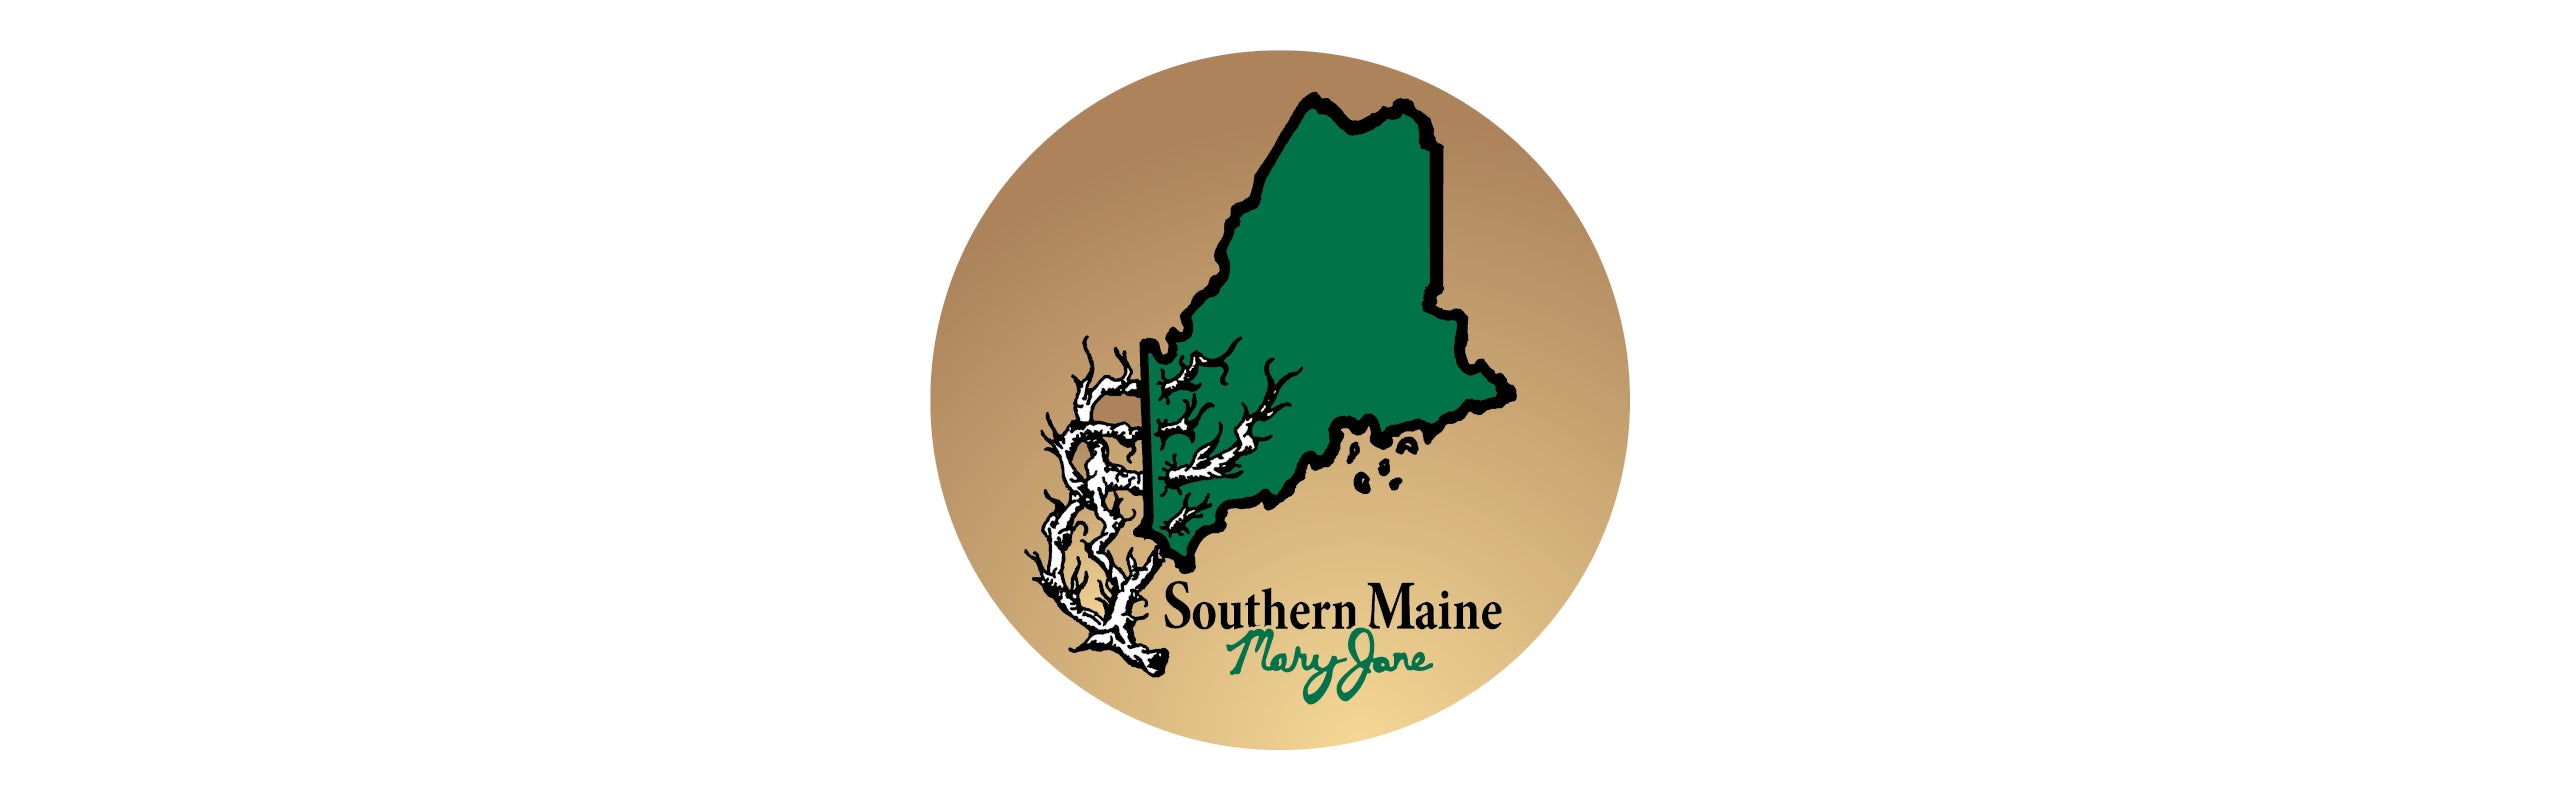 Southern Maine Mary Jane banner